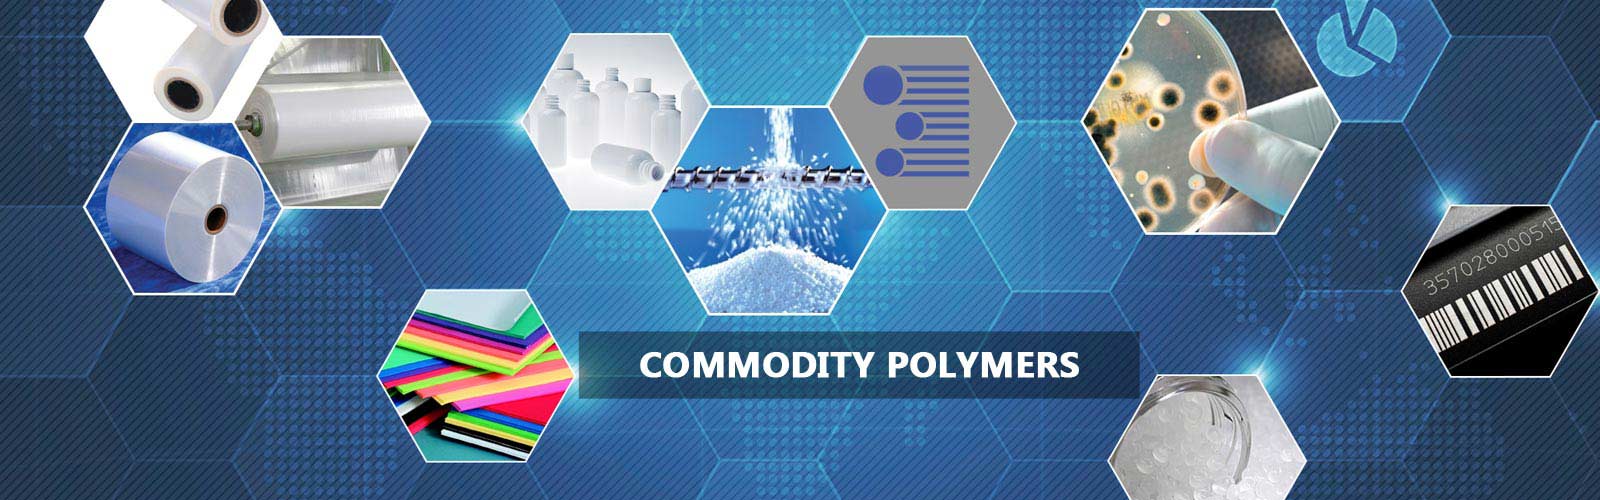 Commodity Polymers